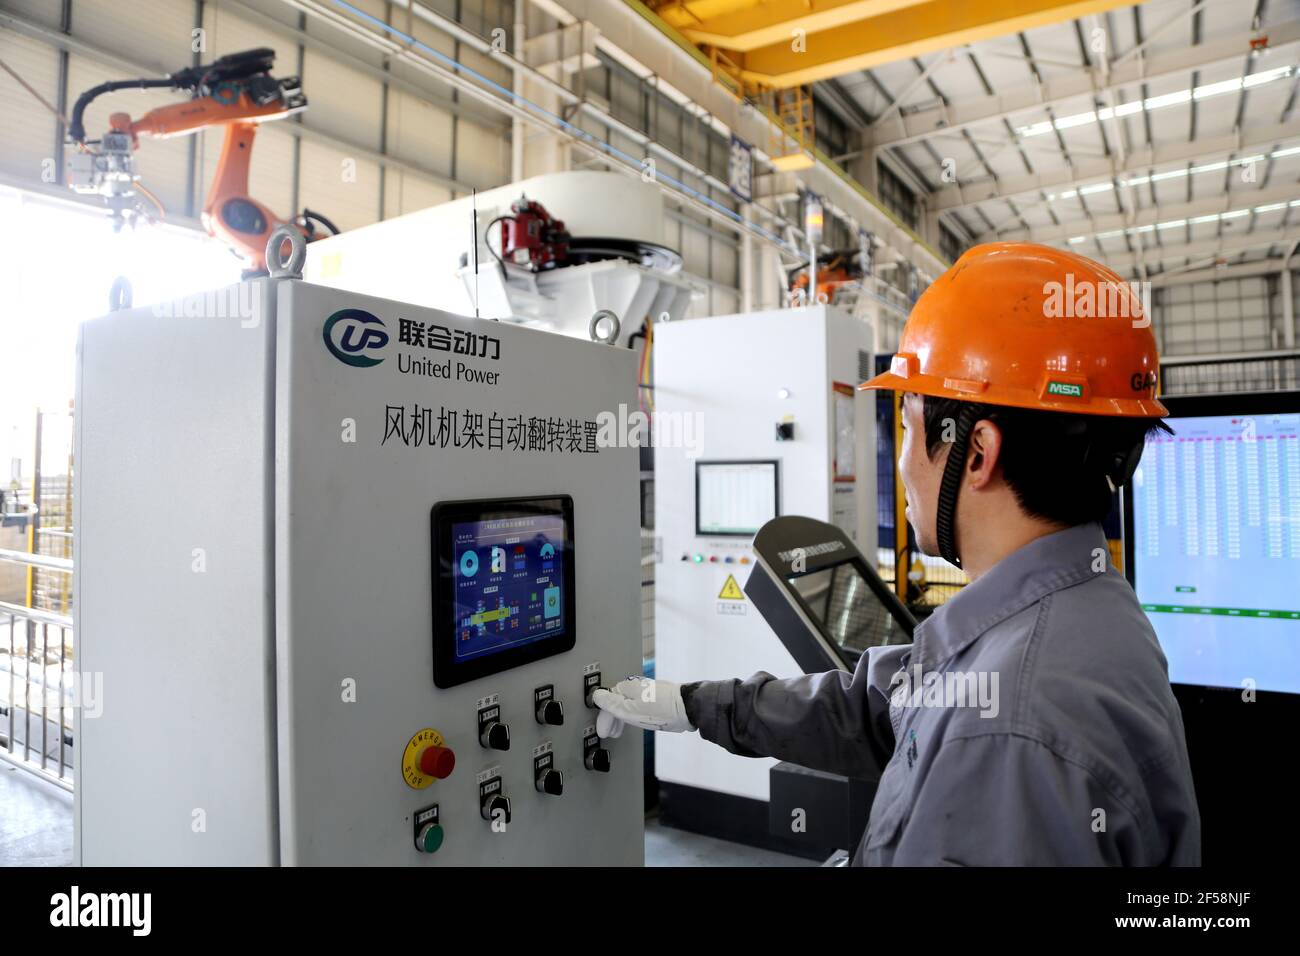 LIANYUNGANG, CHINA - MARCH 25, 2021 - A worker conducts a production operation at a production workshop of national  United Power Technology (Lianyungang) Co., Ltd in Lianyungang, Jiangsu province, China, March 25, 2021. national United Power Technology (Lianyungang) Co., Ltd. continues to carry out product upgrading and innovation, and invests in R&D, manufacturing, sales and commissioning projects of 8-15MW offshore wind turbine and 3.X-5.X onshore large wind turbine. Up to now, the output has increased by 92% compared with the same period last year. (Photo by Wang Chun / Costfoto/Sipa USA) Stock Photo